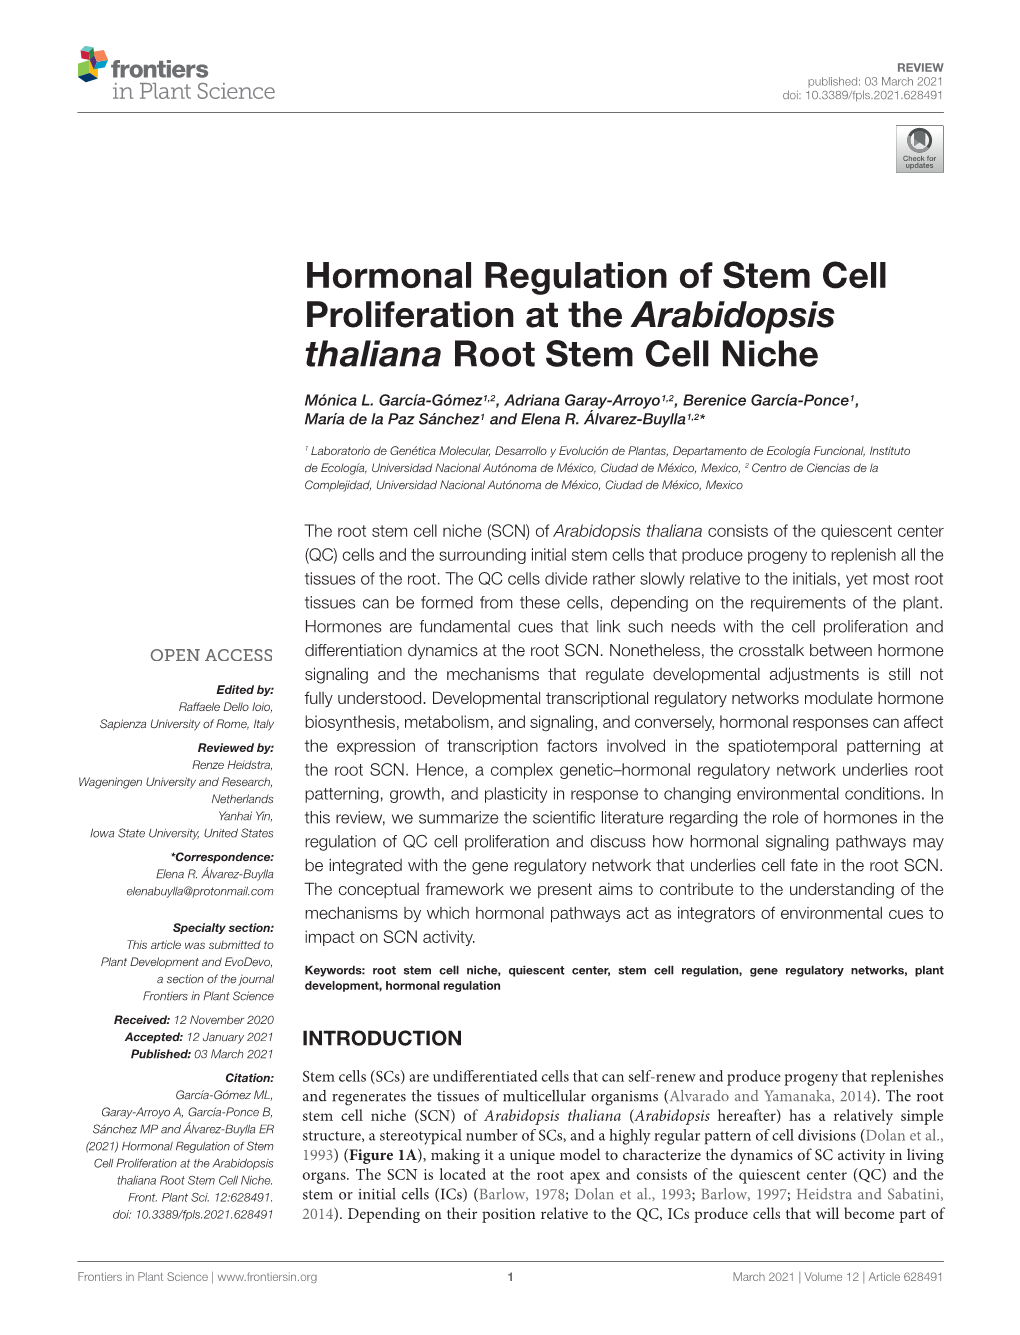 Hormonal Regulation of Stem Cell Proliferation at the Arabidopsis Thaliana Root Stem Cell Niche